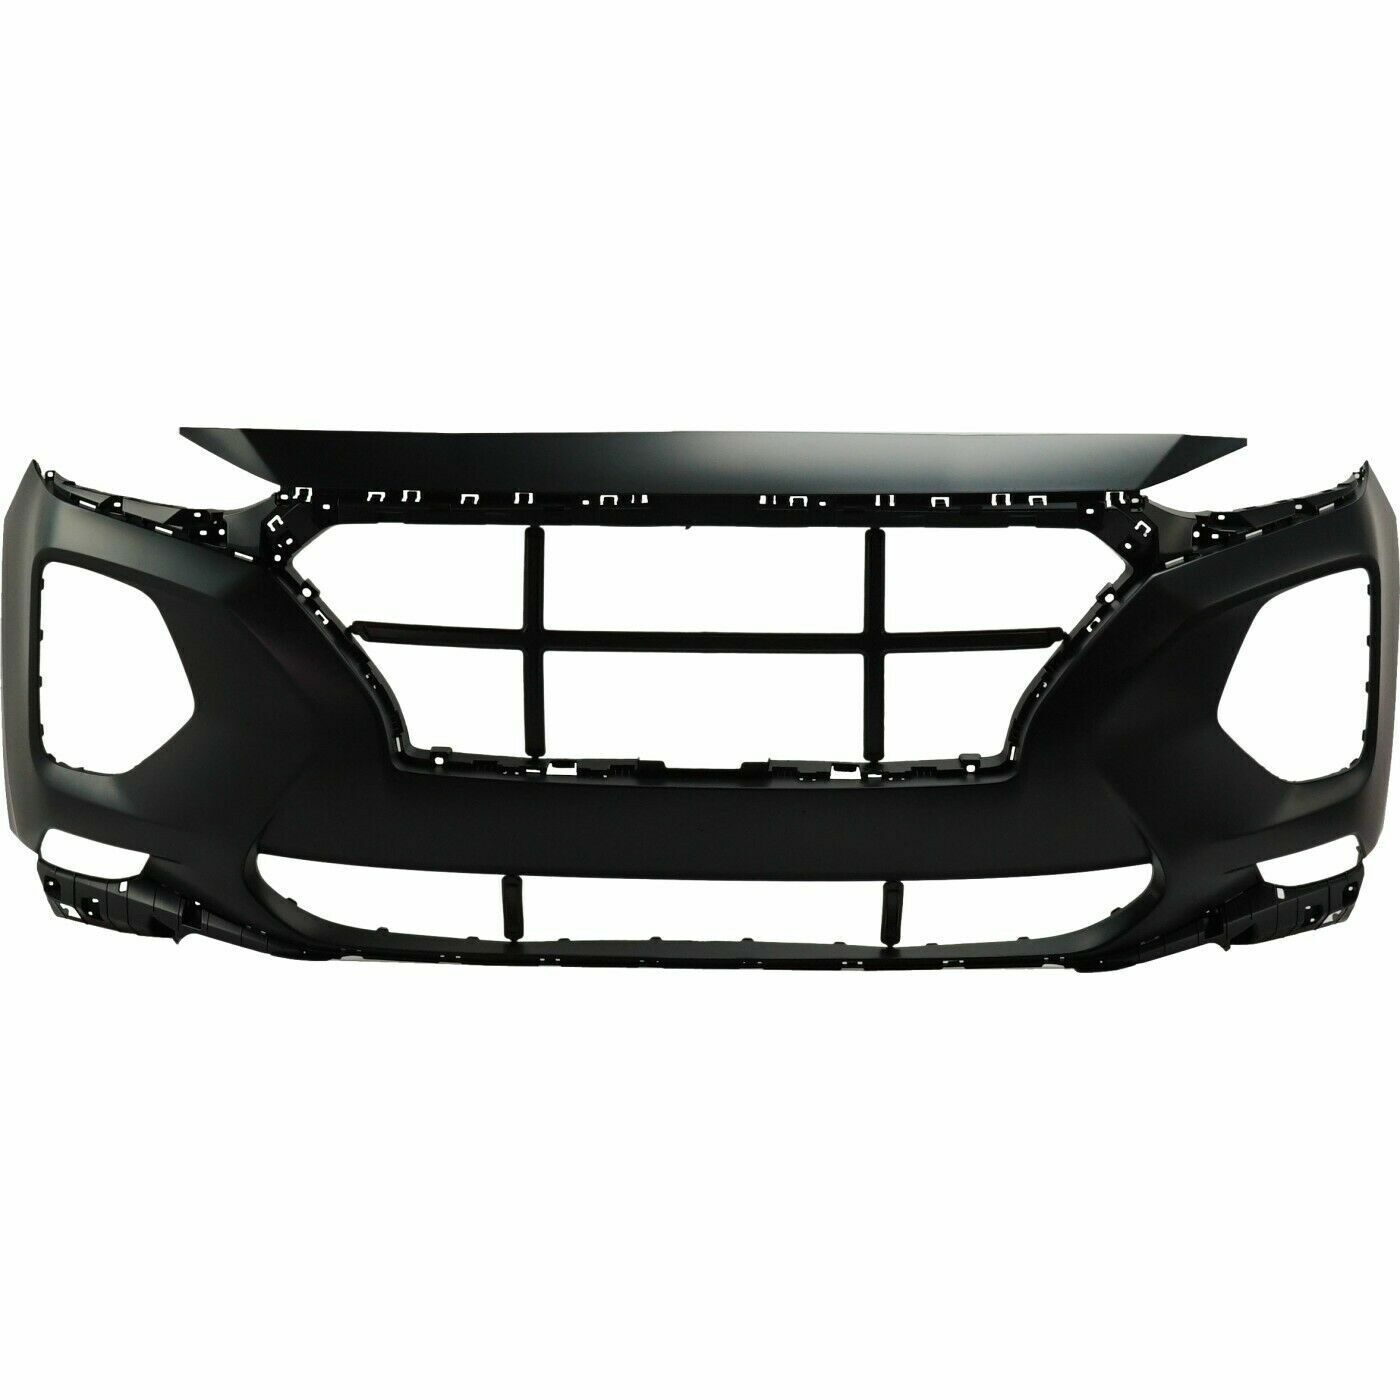 2019-2020 HYUNDAI Santa Fe; Front Bumper Cover; Painted to Match